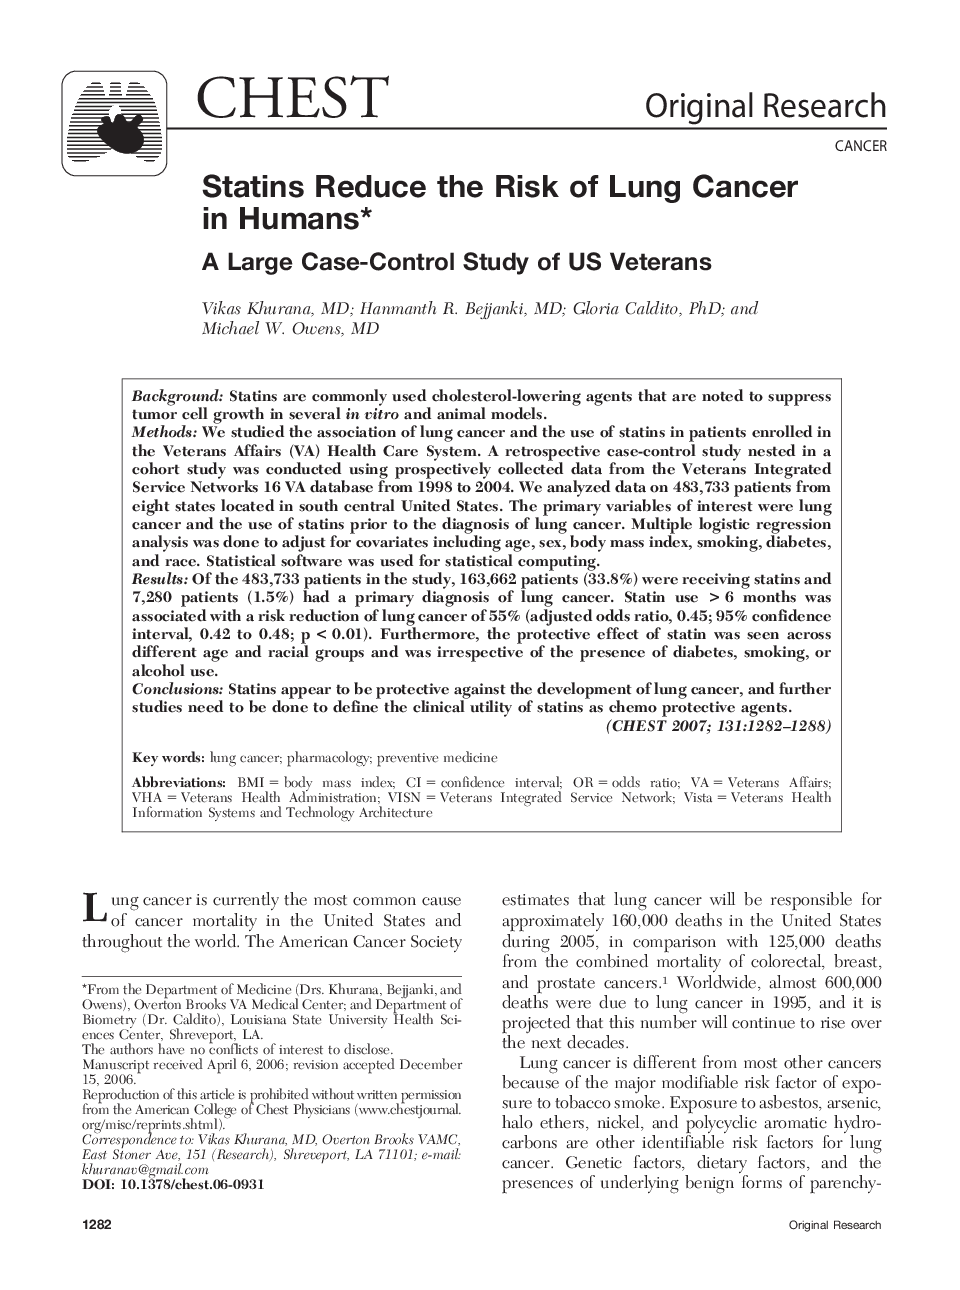 Statins Reduce the Risk of Lung Cancer in Humans : A Large Case-Control Study of US Veterans